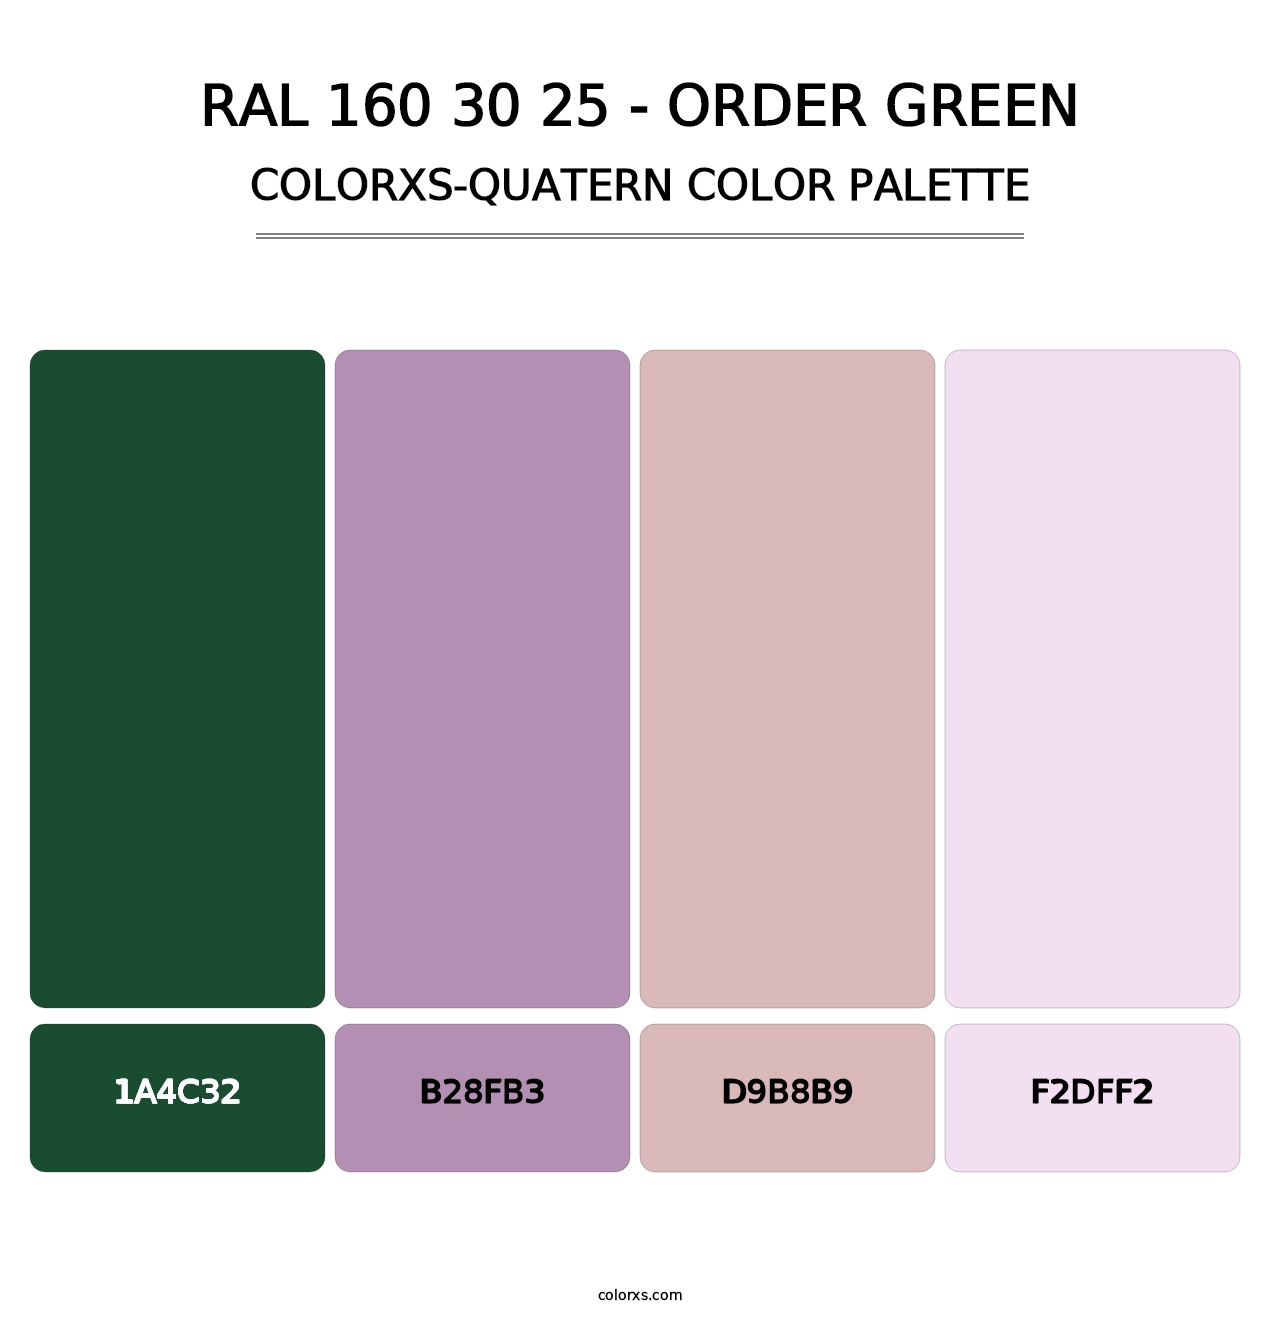 RAL 160 30 25 - Order Green - Colorxs Quatern Palette